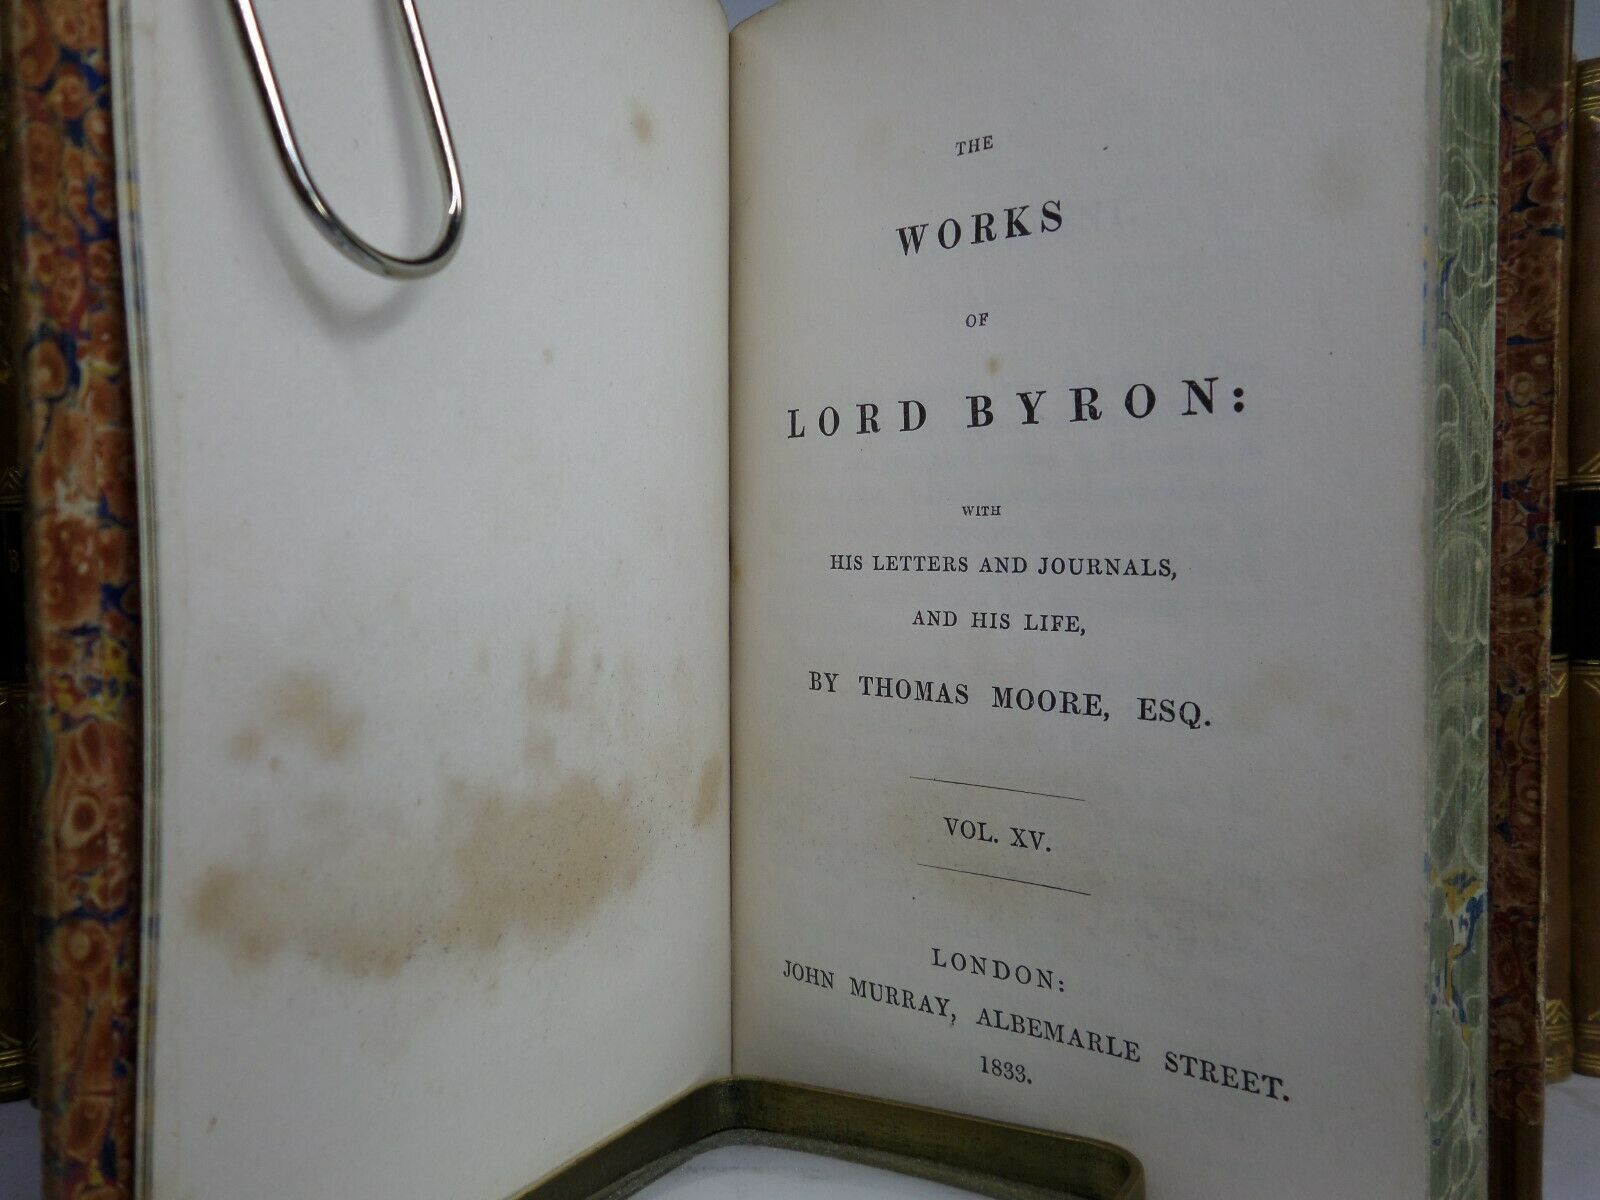 THE POETICAL WORKS OF LORD BYRON IN 17 VOLUMES 1832-1833 FINE LEATHER-BINDINGS